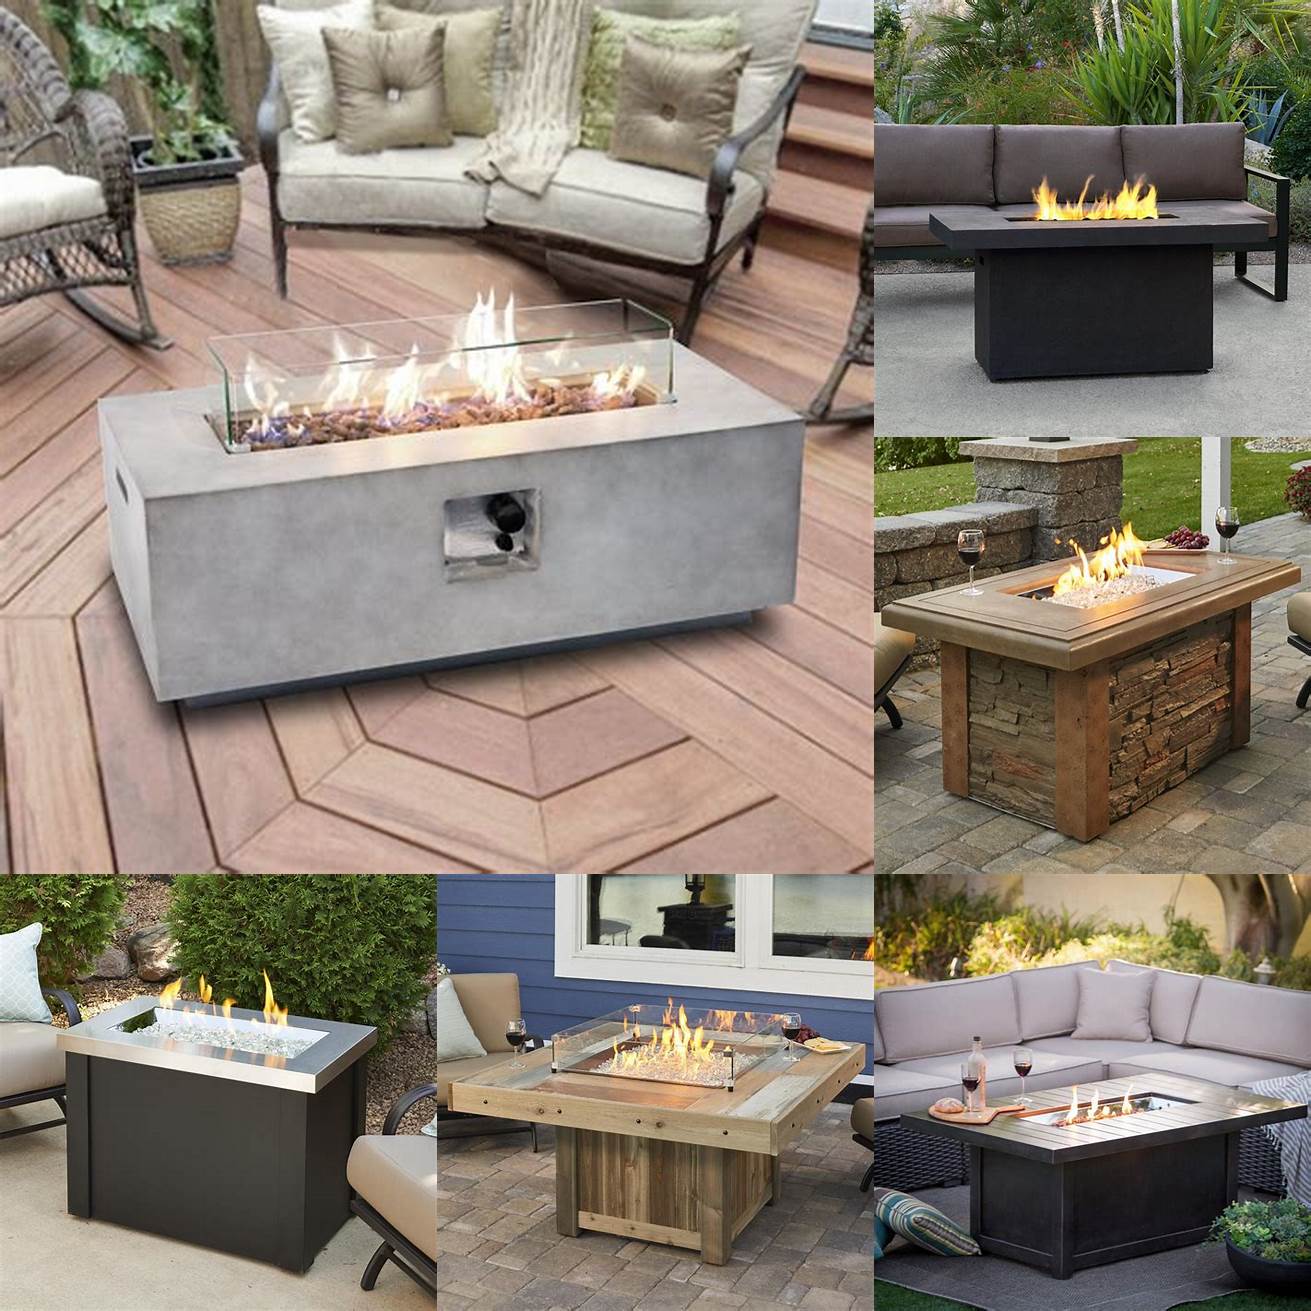 Fire pit table with gas-powered flames and sleek design